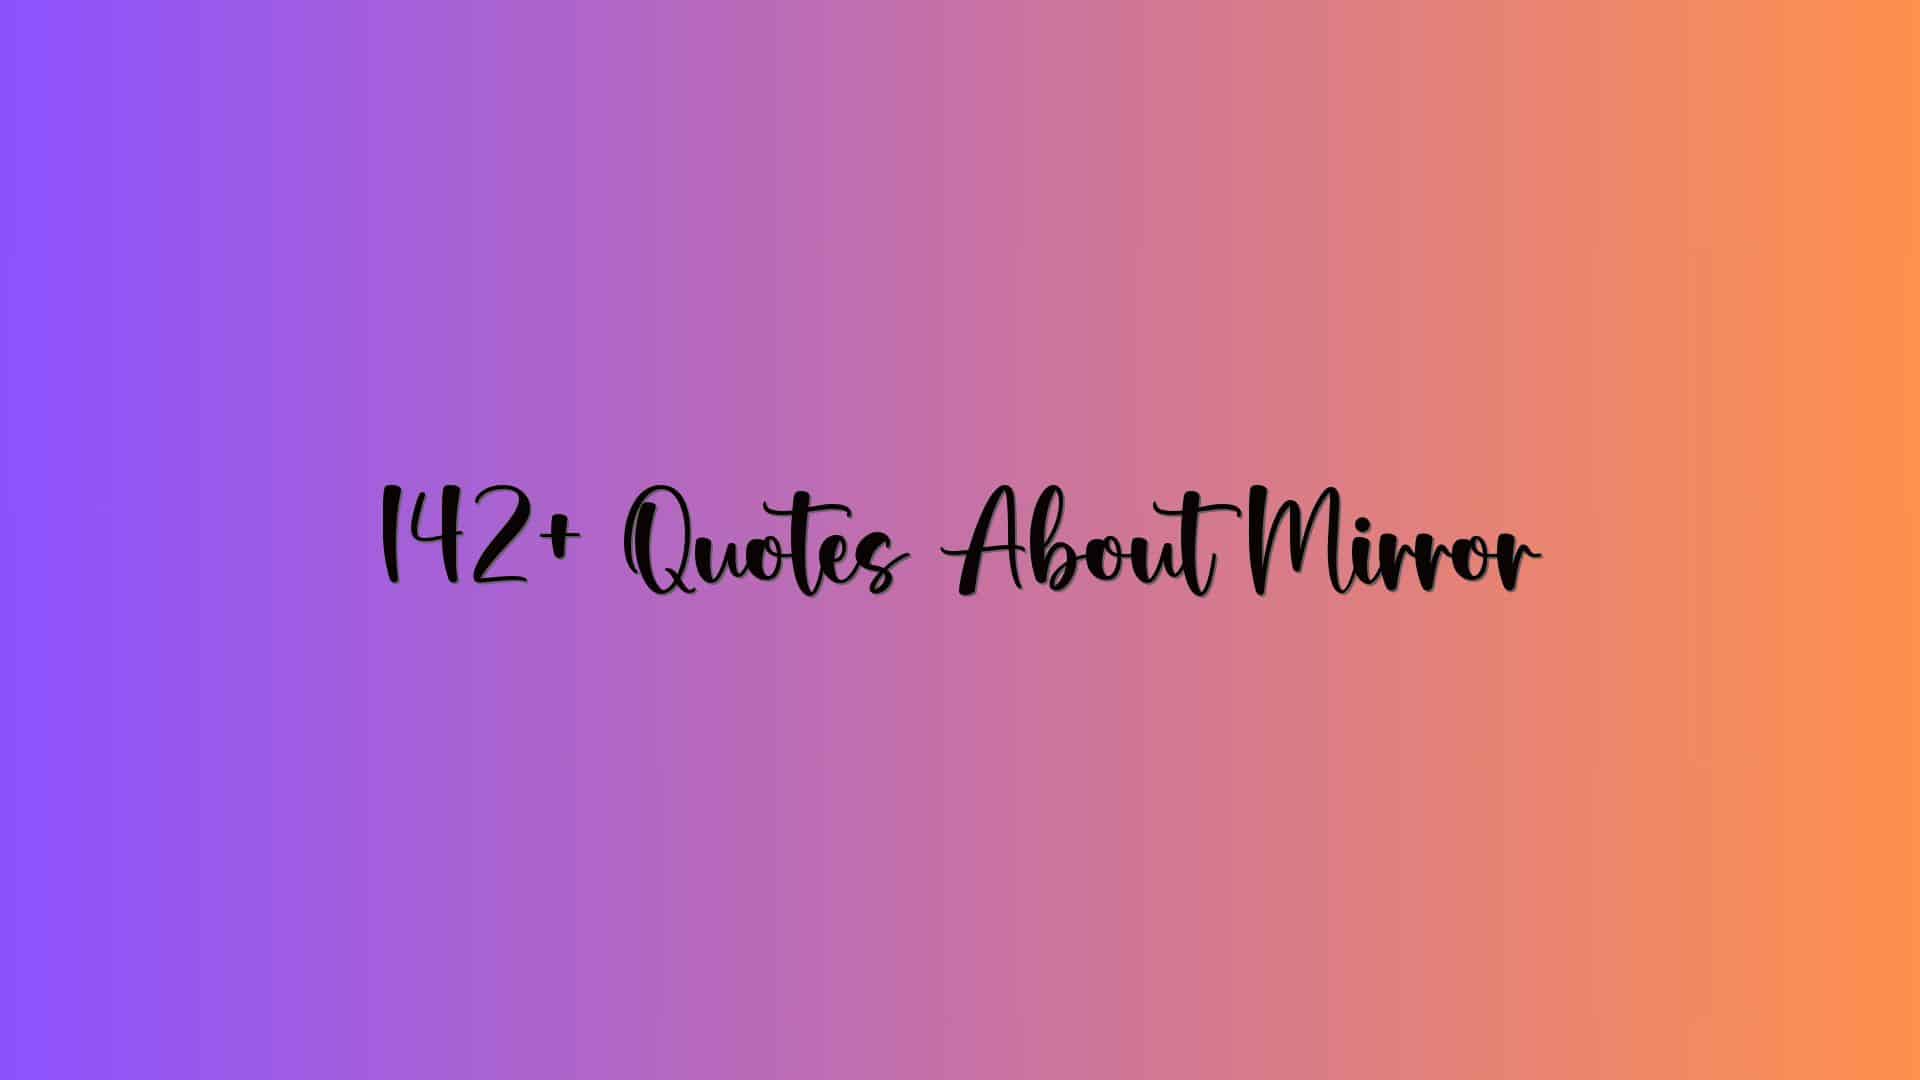 142+ Quotes About Mirror